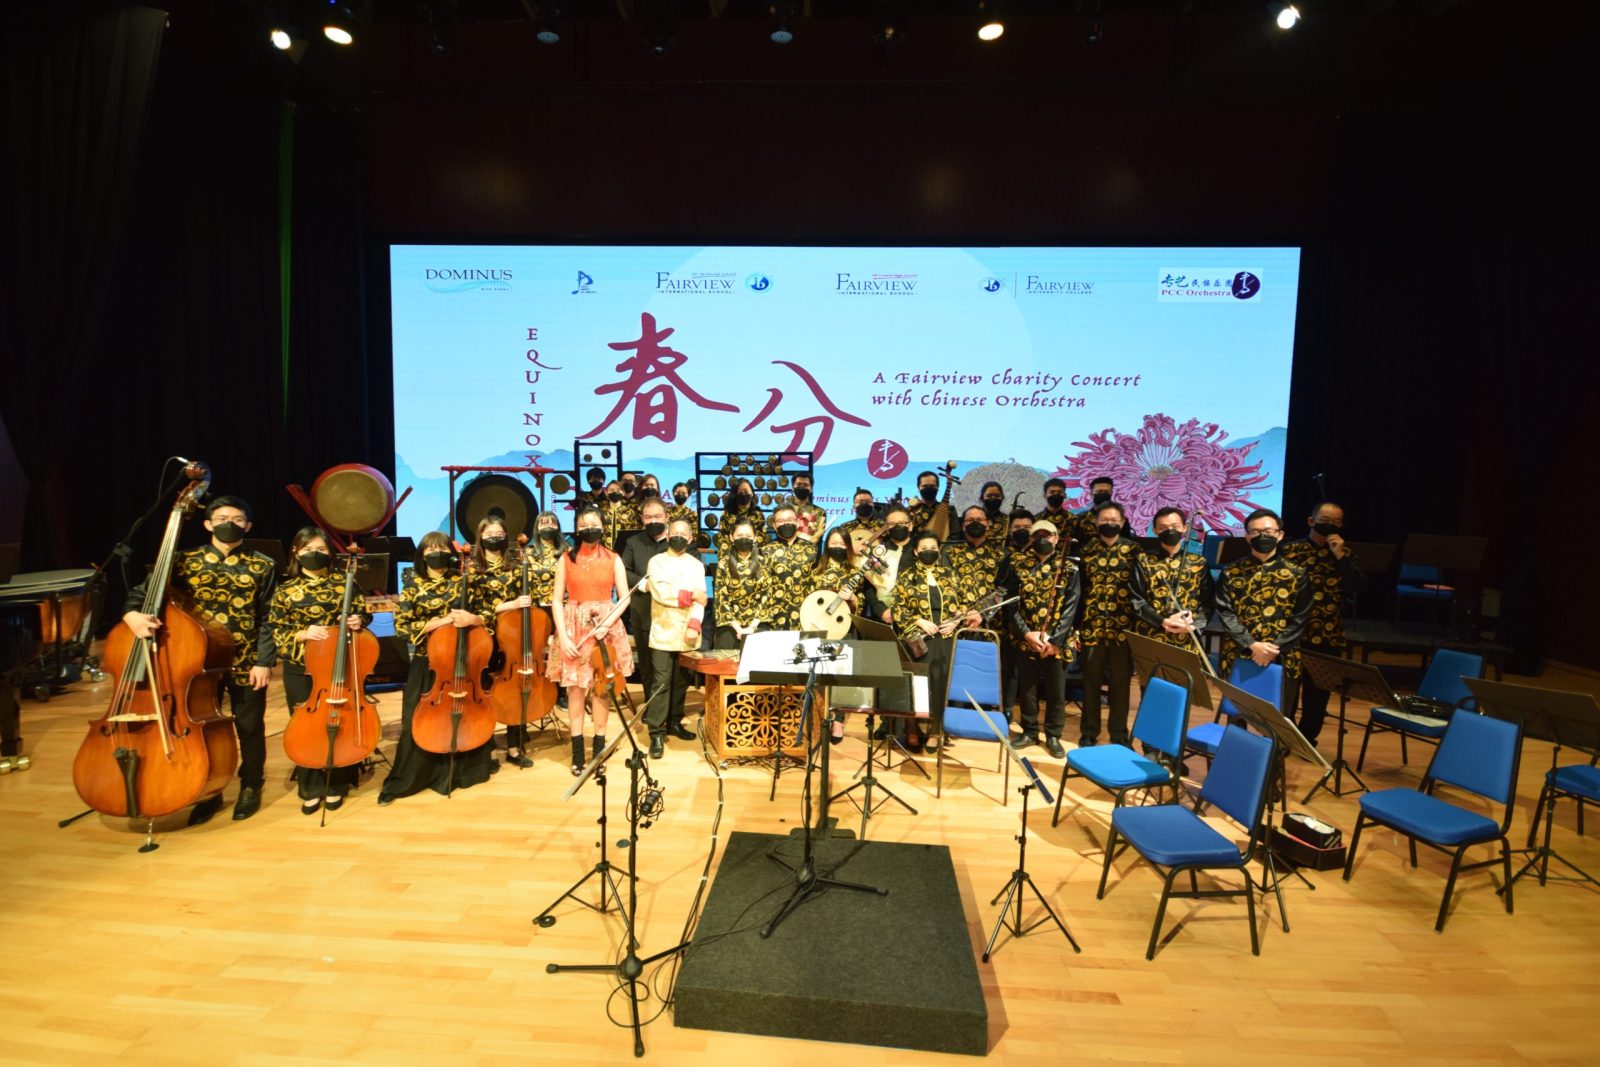 Fairview Charity concert with Chinese Orchestra14